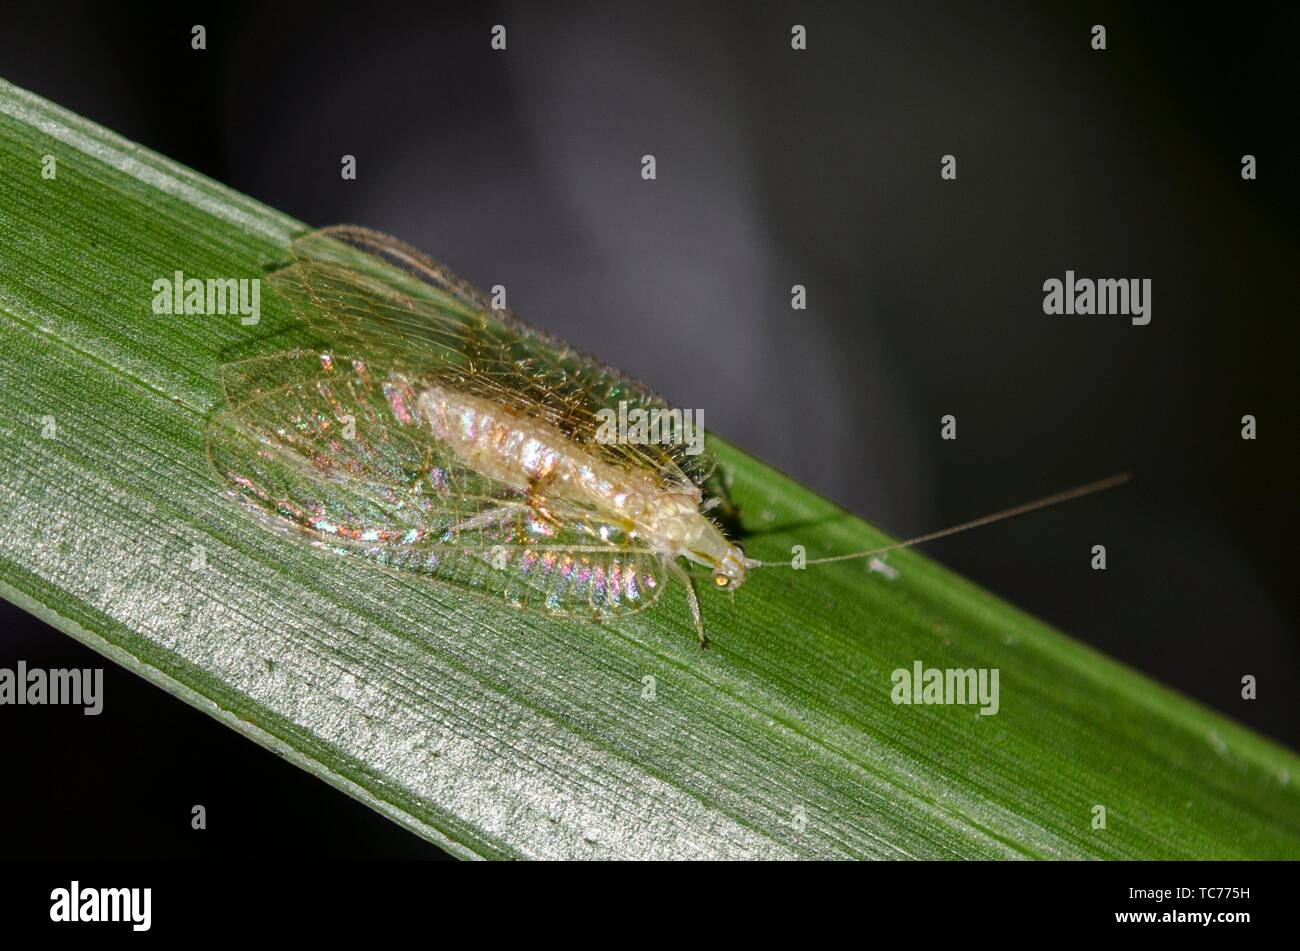 Lacewing (Ankylopteryx sp, Neuroptera Order) on leaf, Klungkung, Bali, Indonesia. Stock Photo